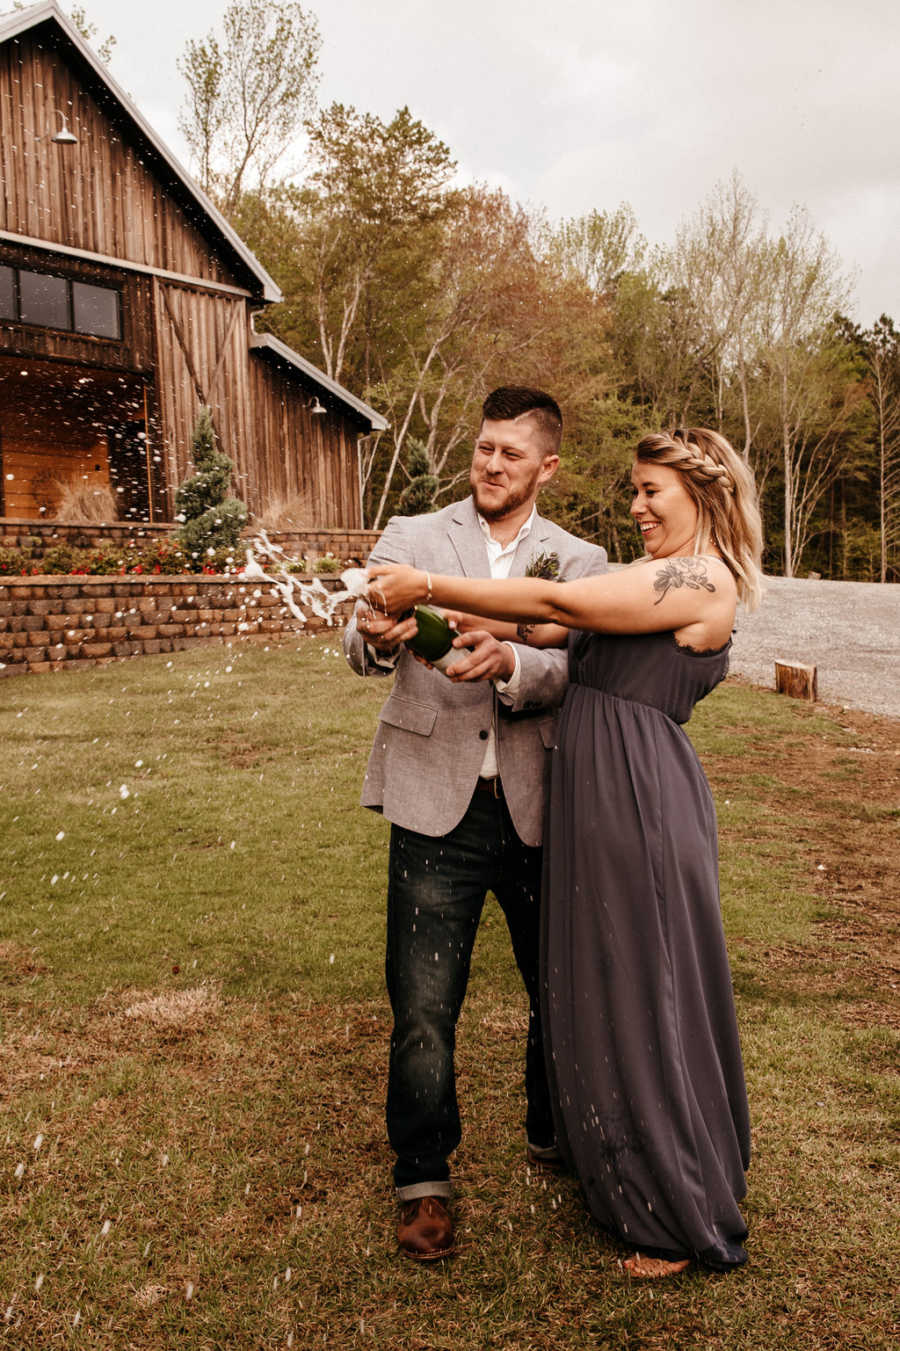 Newly engaged couple pop bottle of champagne together outside of barn